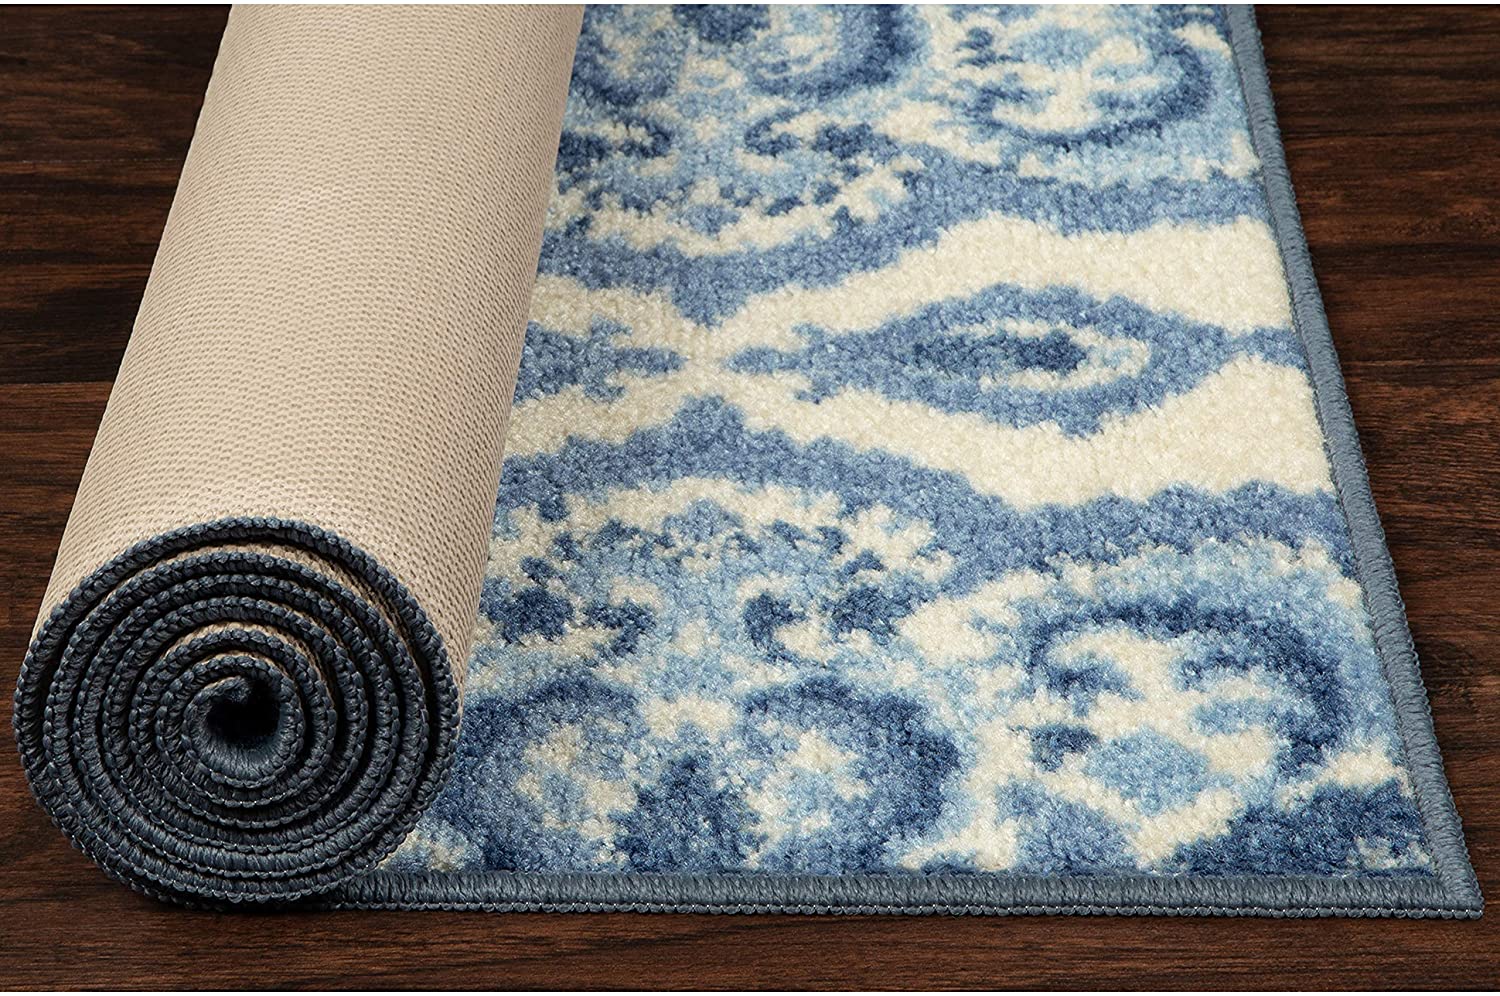 Maples Rugs Caprice Boho Medallion Hallway Entryway Non Skid Runner Rug  [Made in USA], Blue, 2' x 6' - Yahoo Shopping